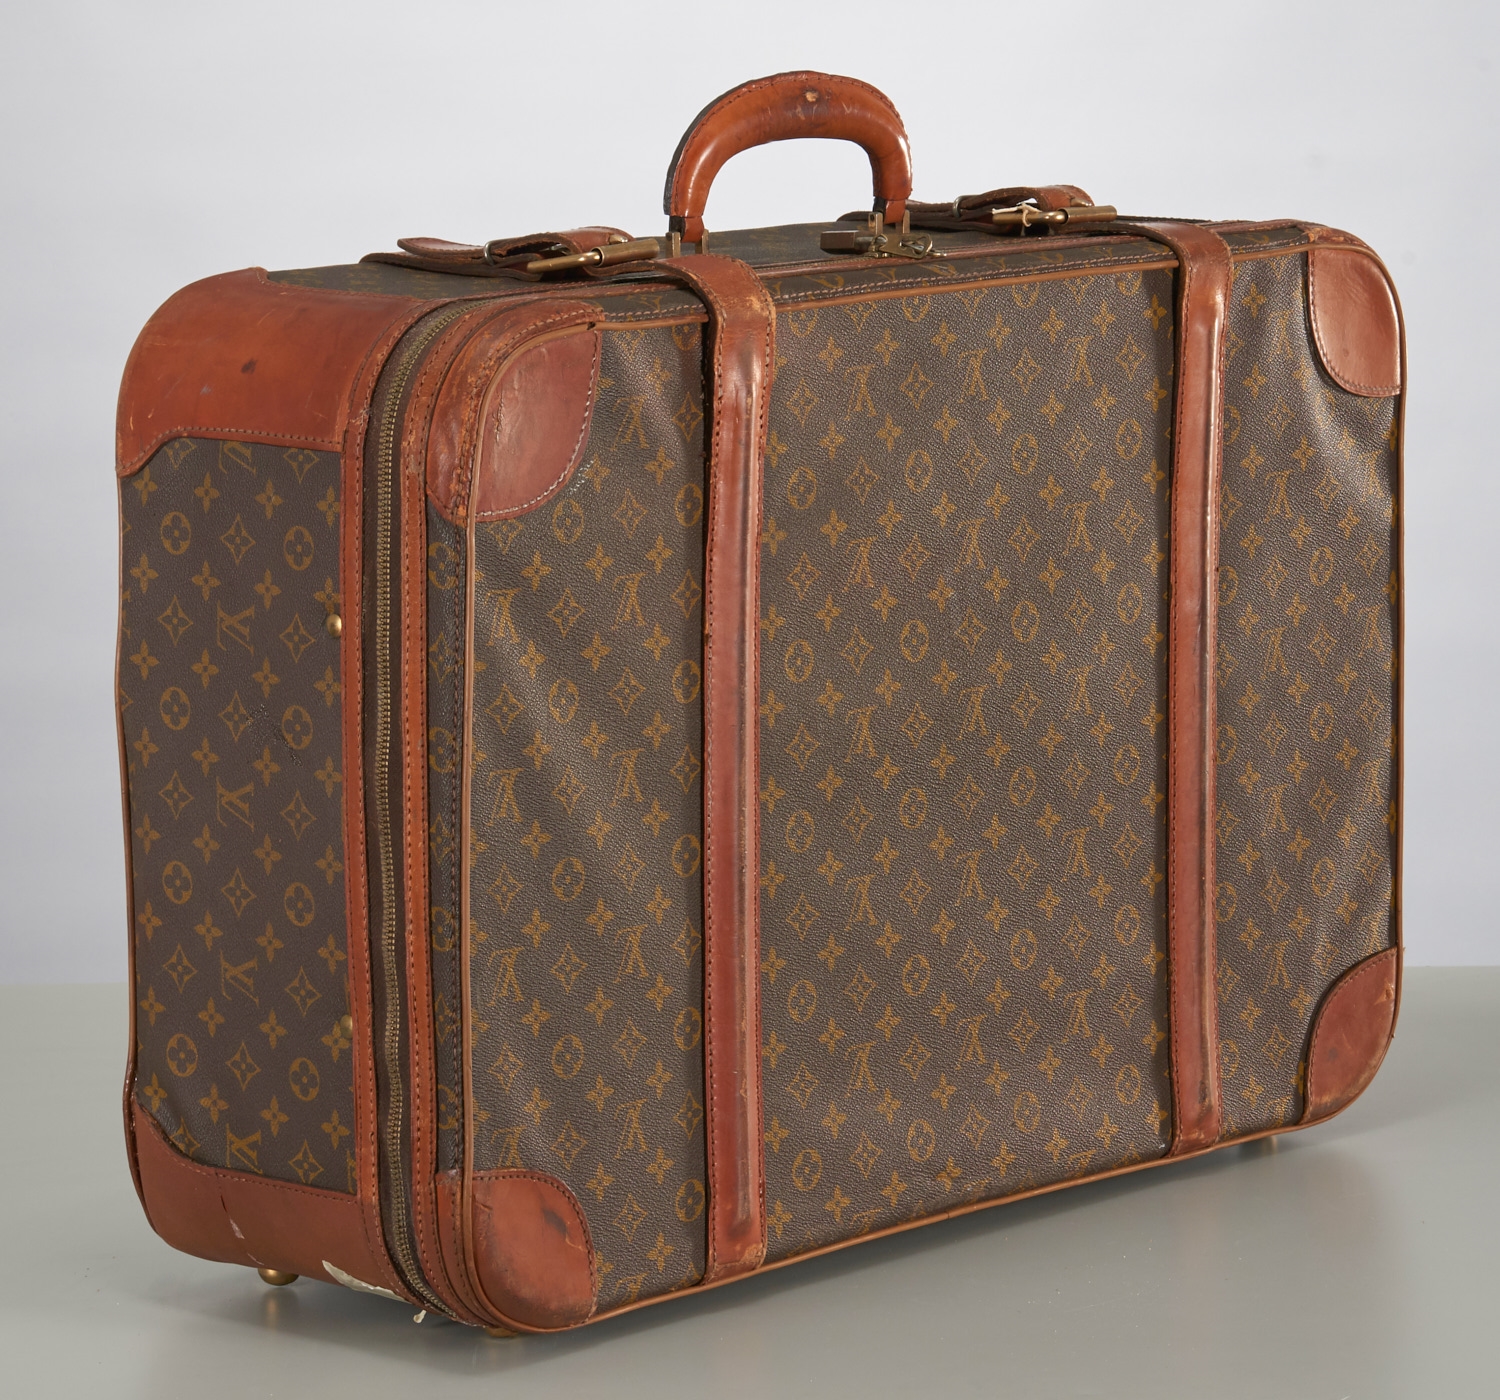 Louis Vuitton Soft Briefcase in Monogram Canvas, 2000 for sale at